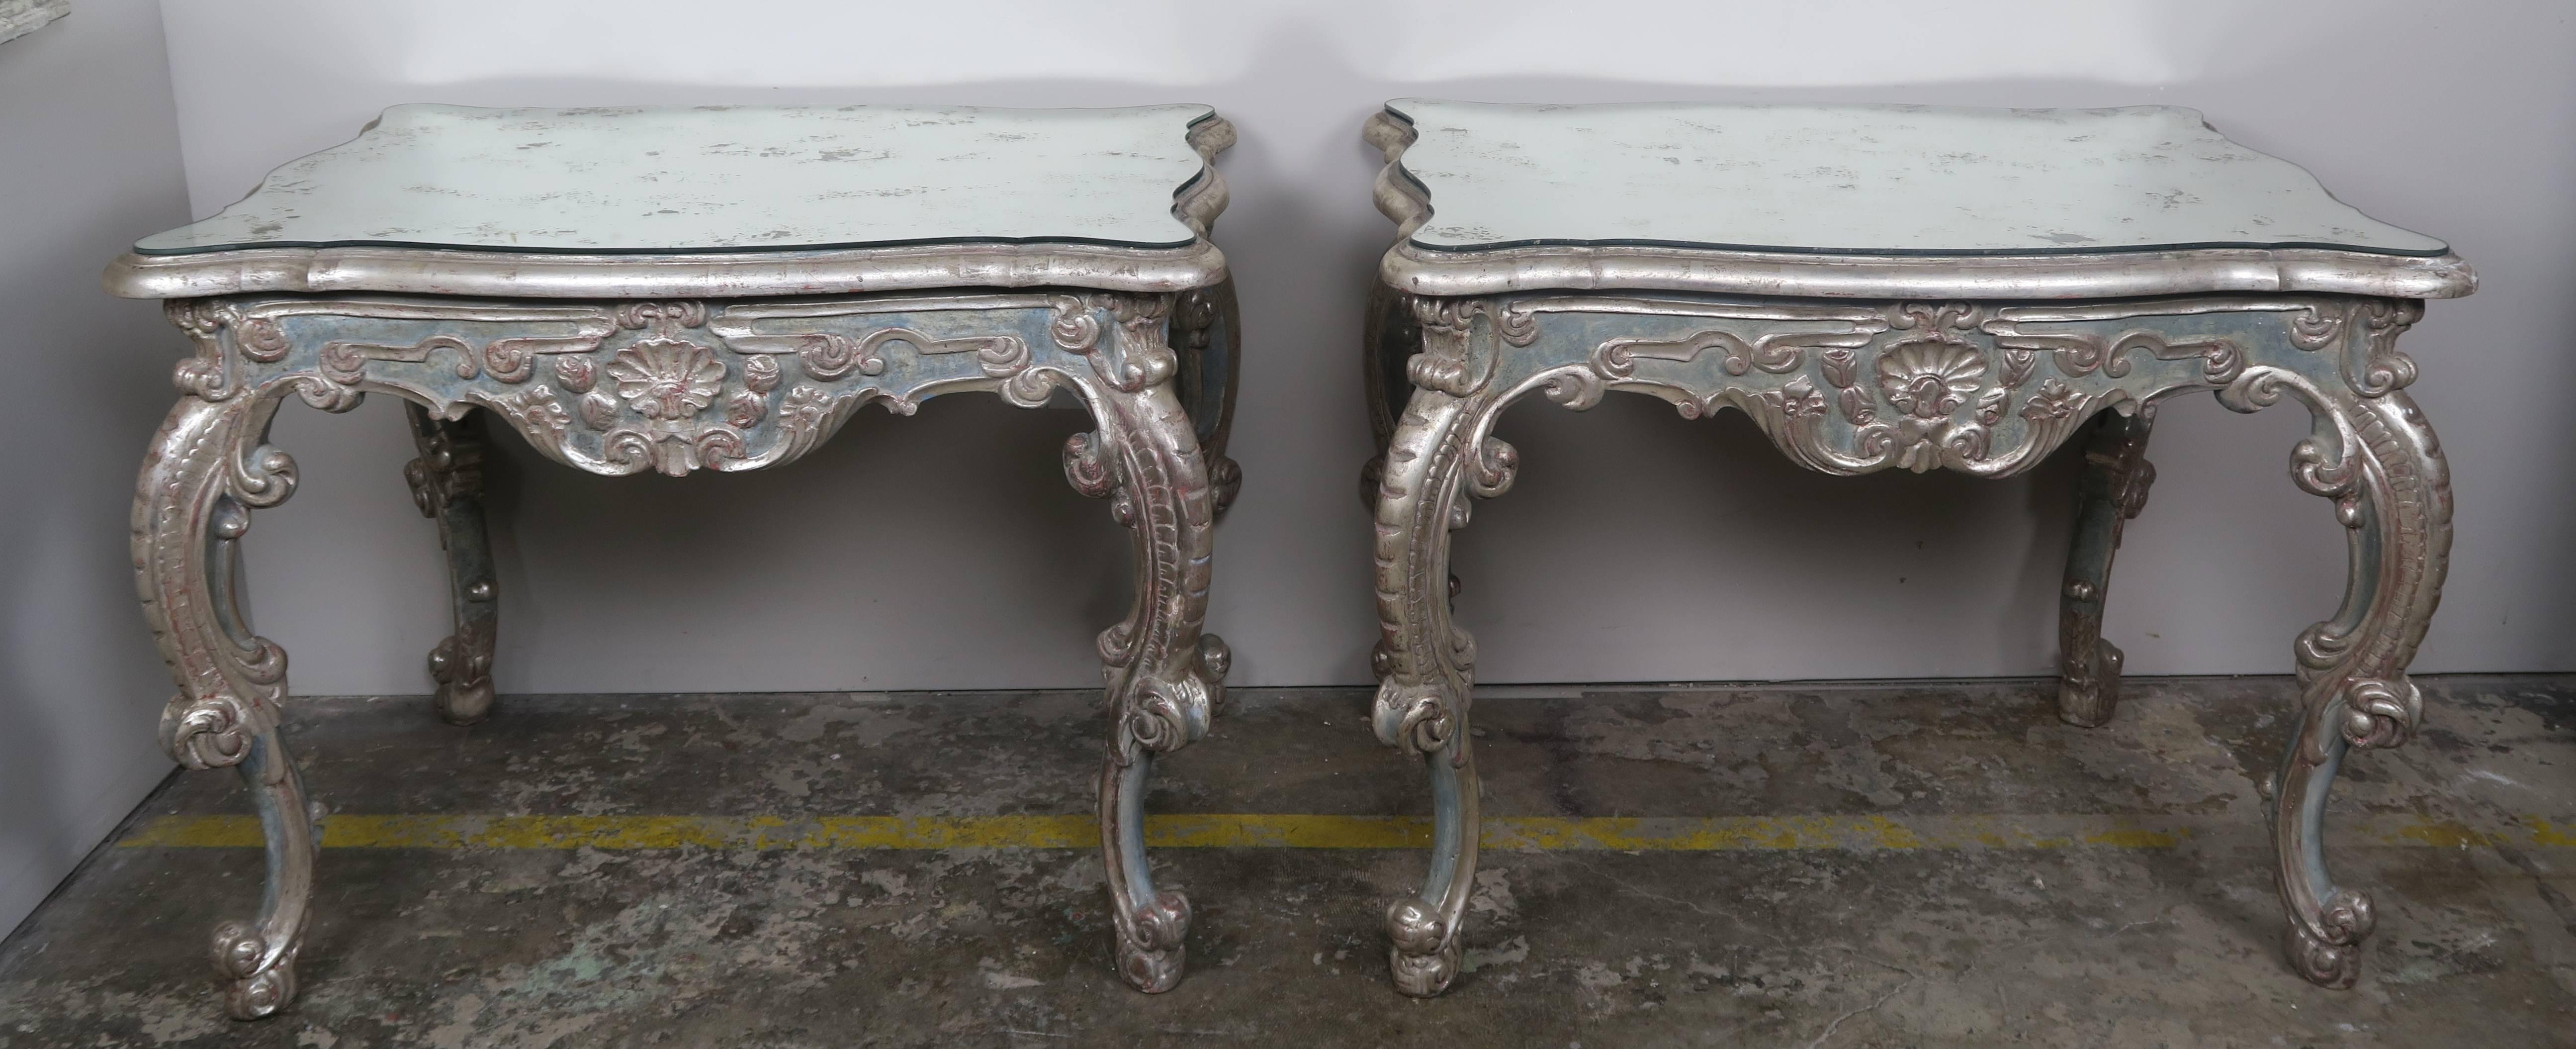 Pair of French painted and silver gilt carved wood tables standing on four cabriole legs with ram's head feet. Beautiful carving throughout. Antique mirrored serpentine shaped tops.